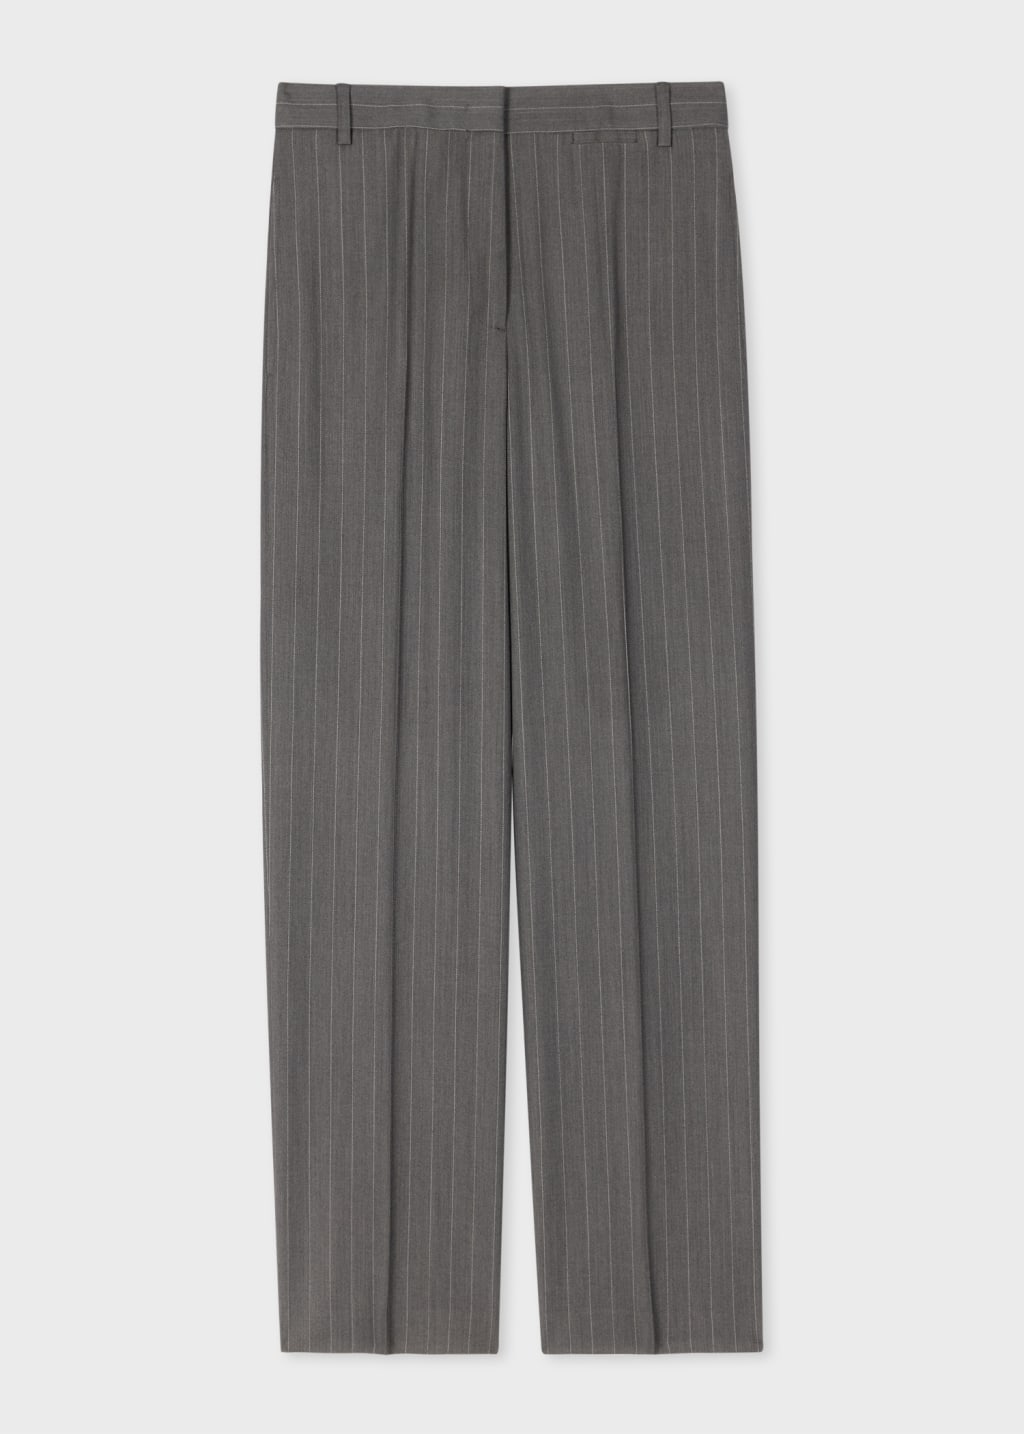 Front View - Women's Charcoal Pinstripe Straight-Leg Trousers Paul Smith